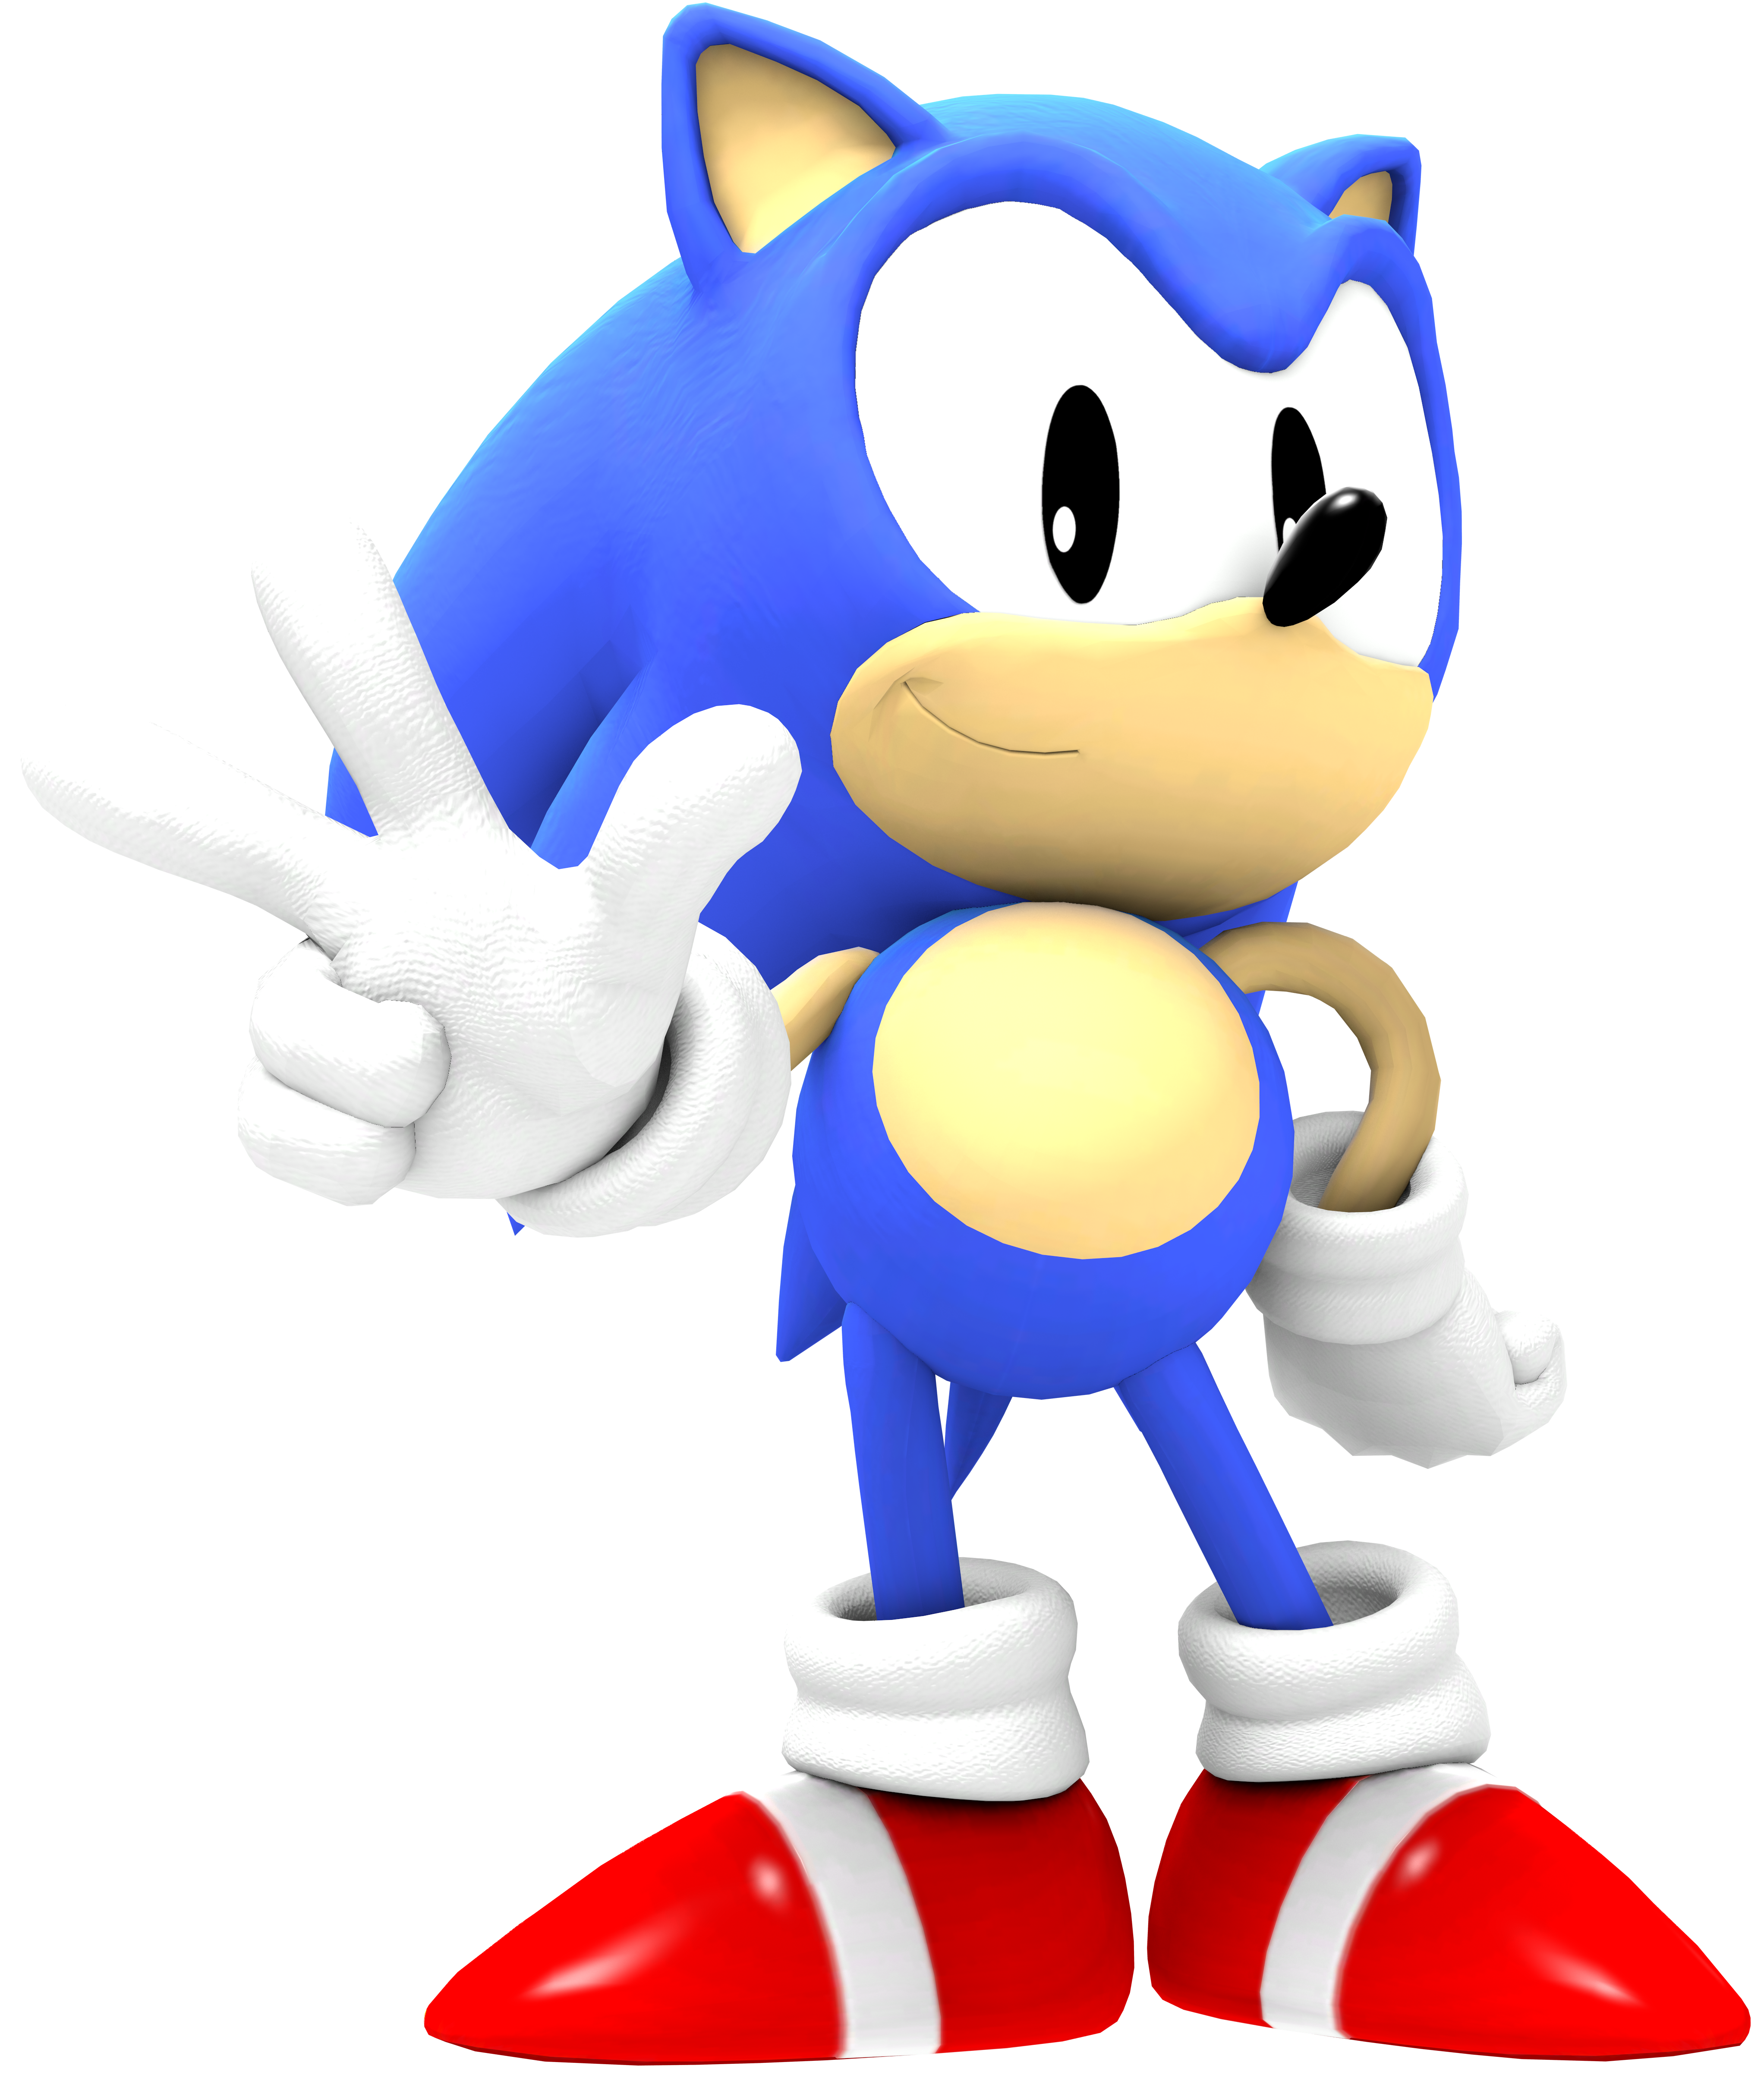 Classic Sonic Render by Sonic29086 on DeviantArt